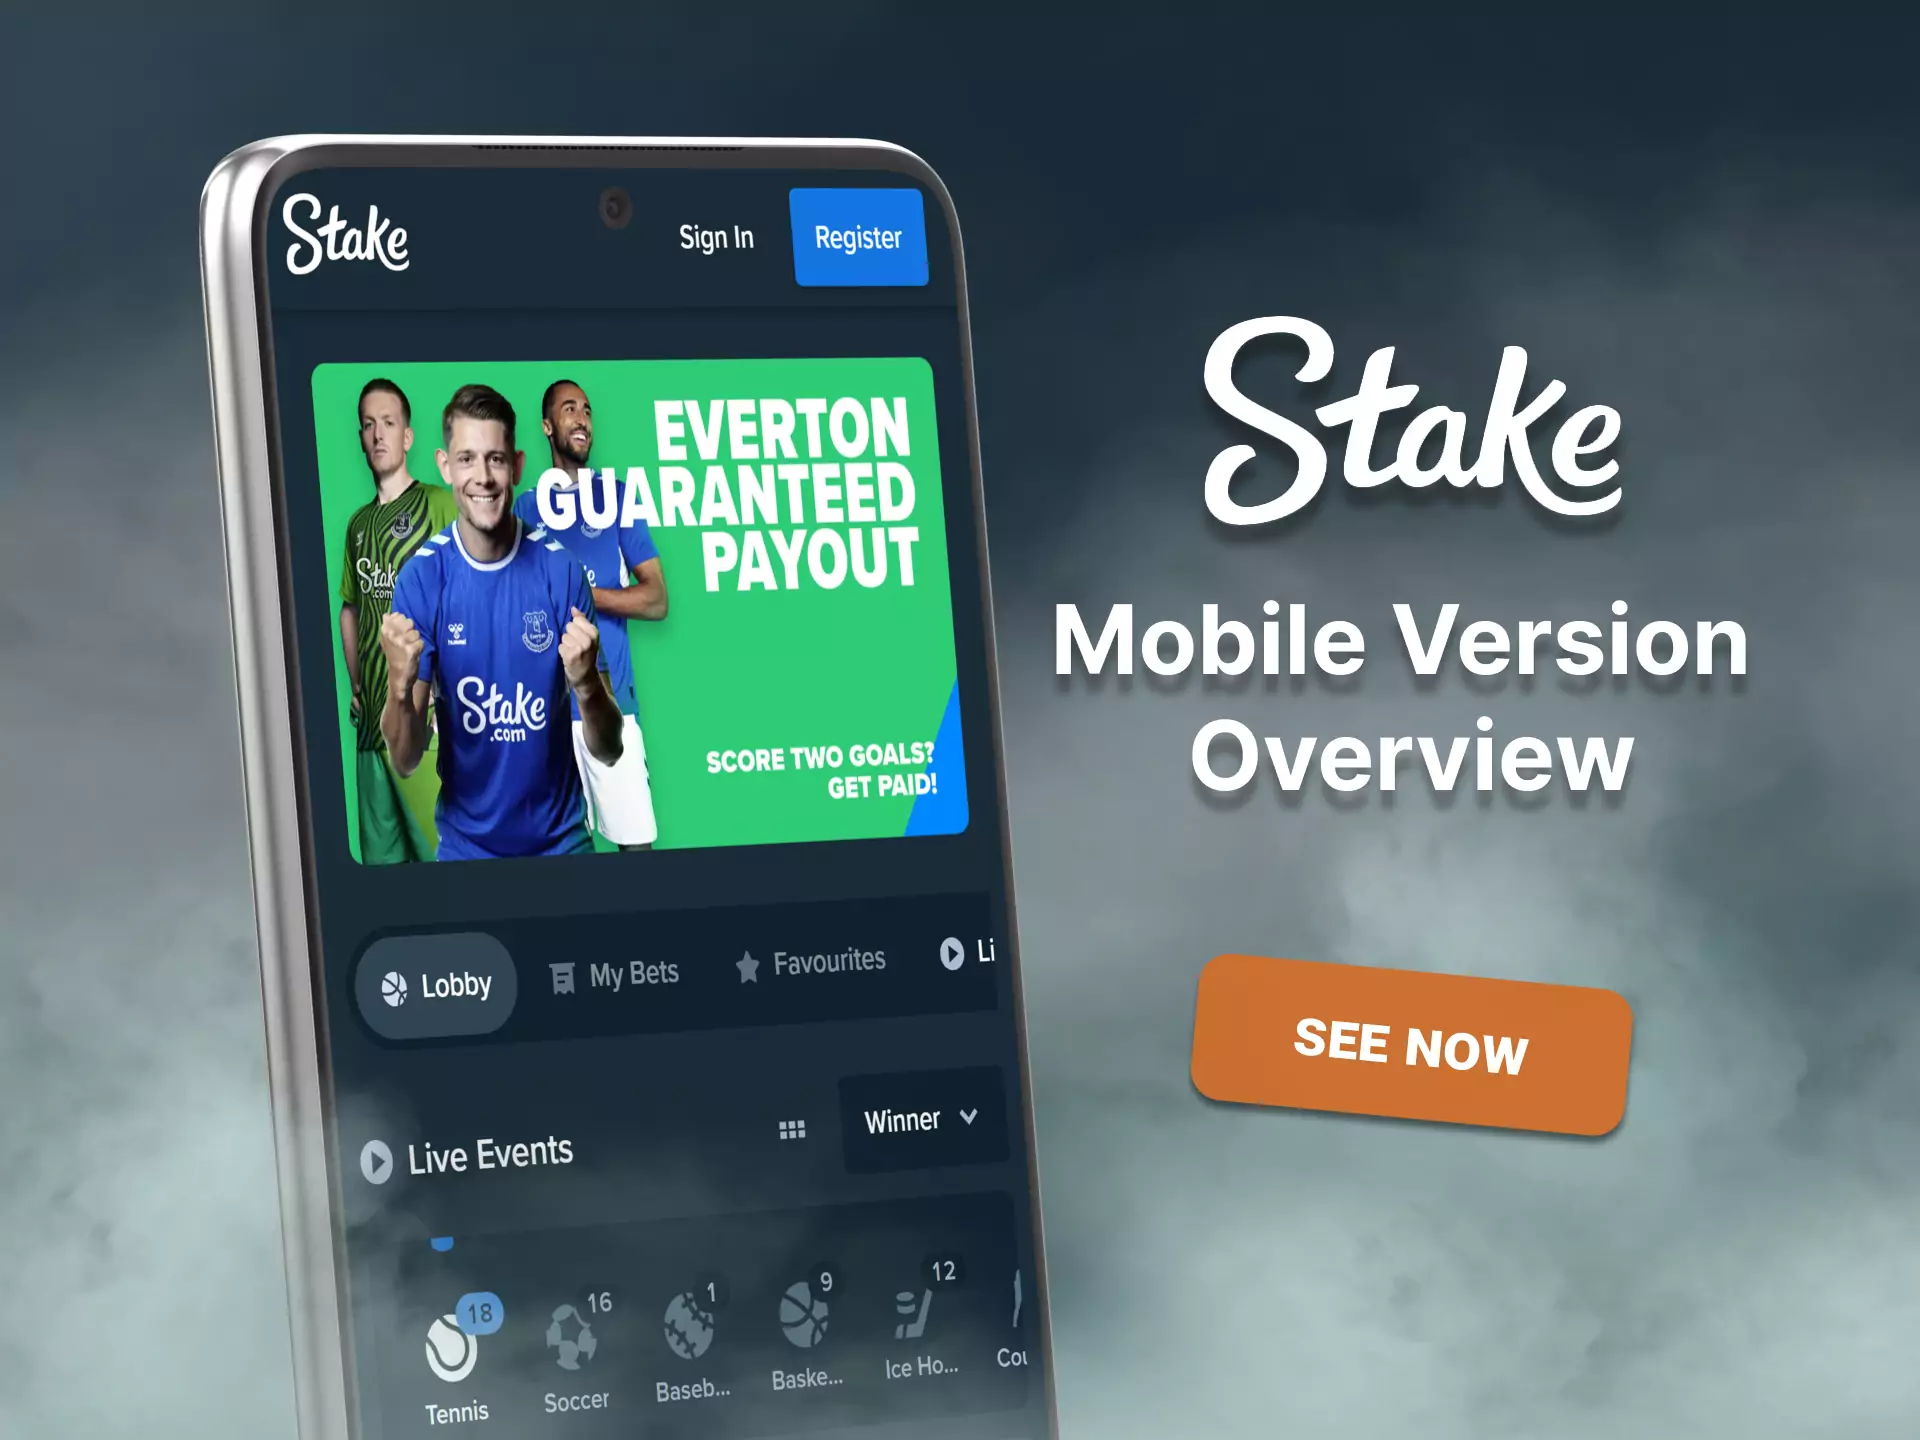 Read the review for the mobile version Stake.com.